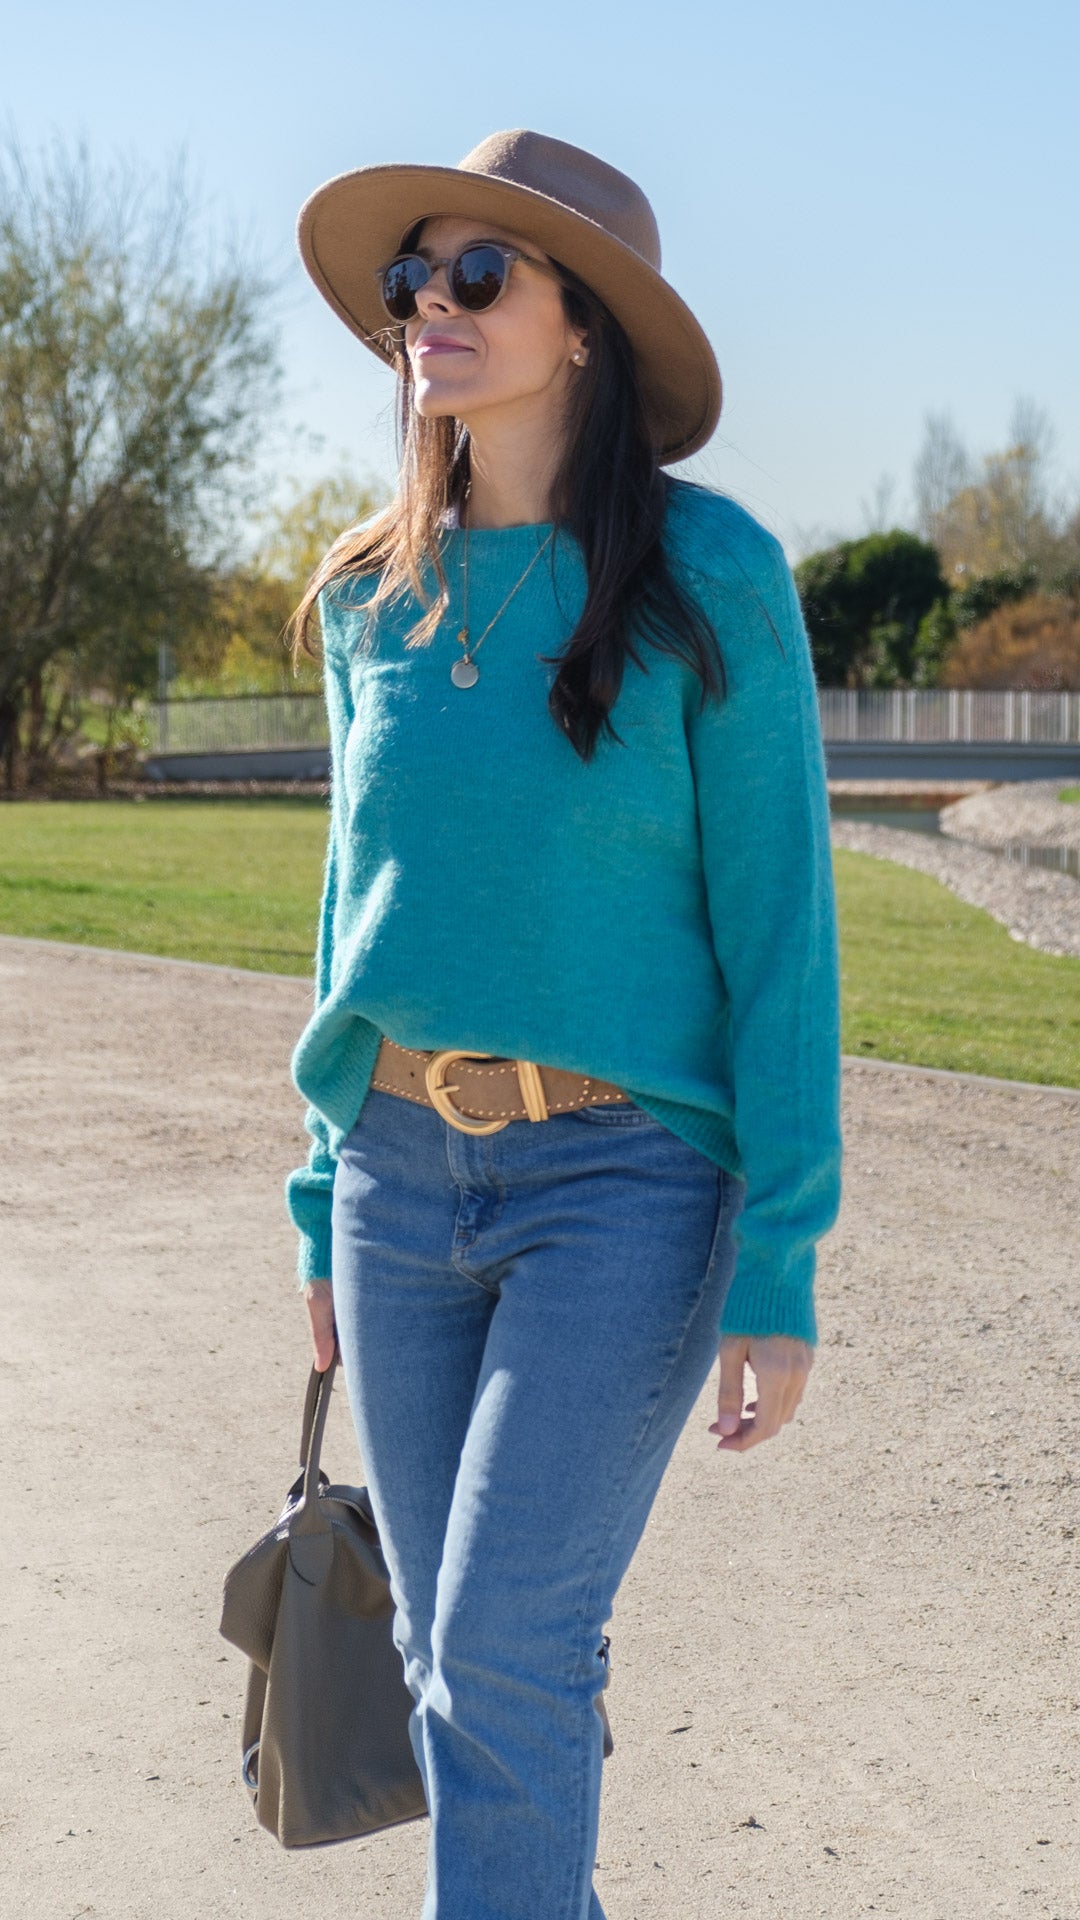 Turquoise Tristán sweater